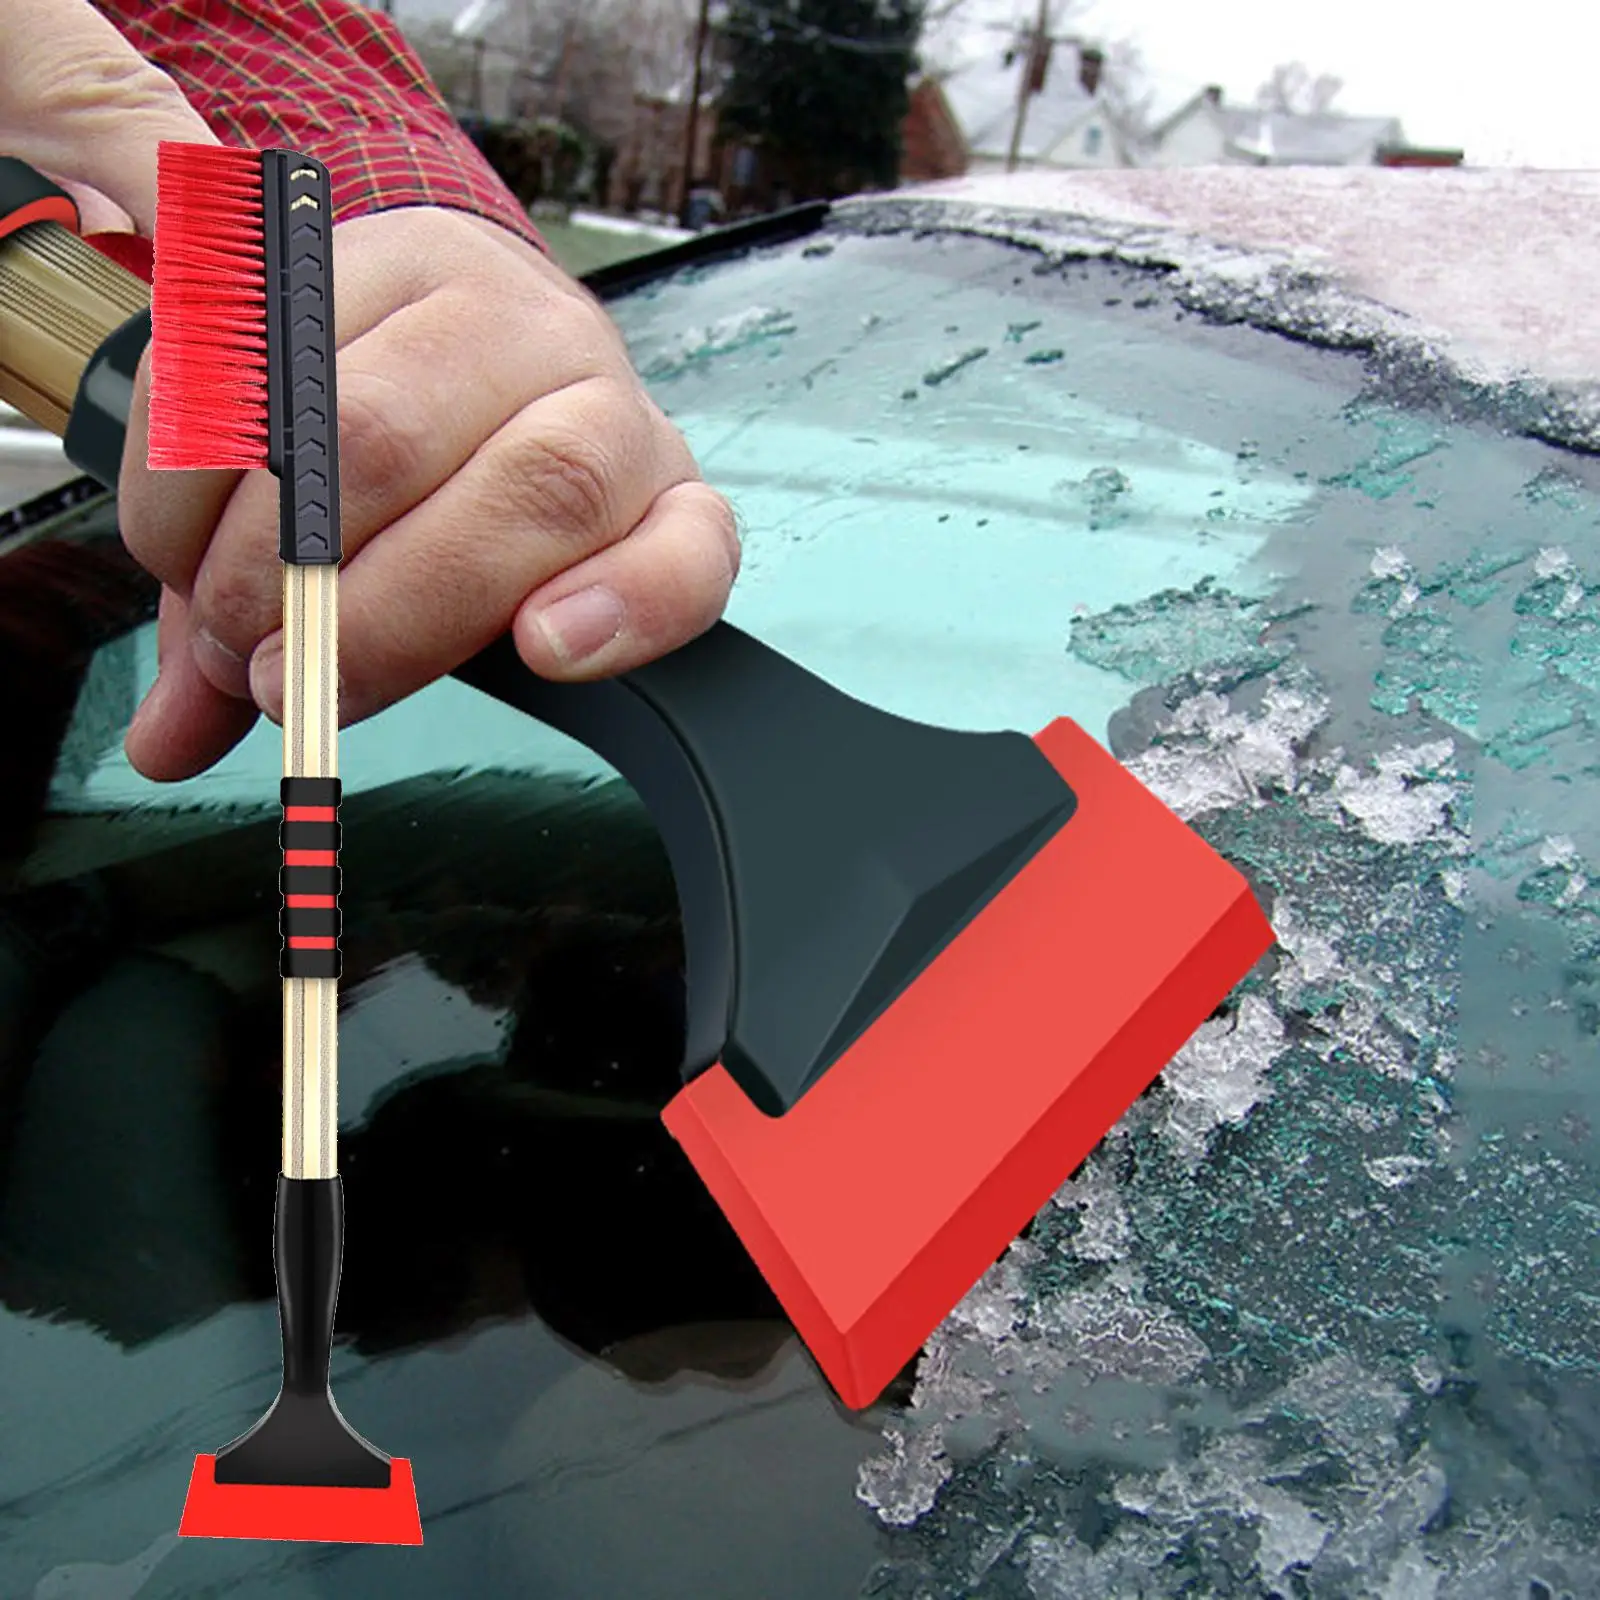 Professional Winter Snow Removal Brush Tool Telescopic Handle Universal for SUV